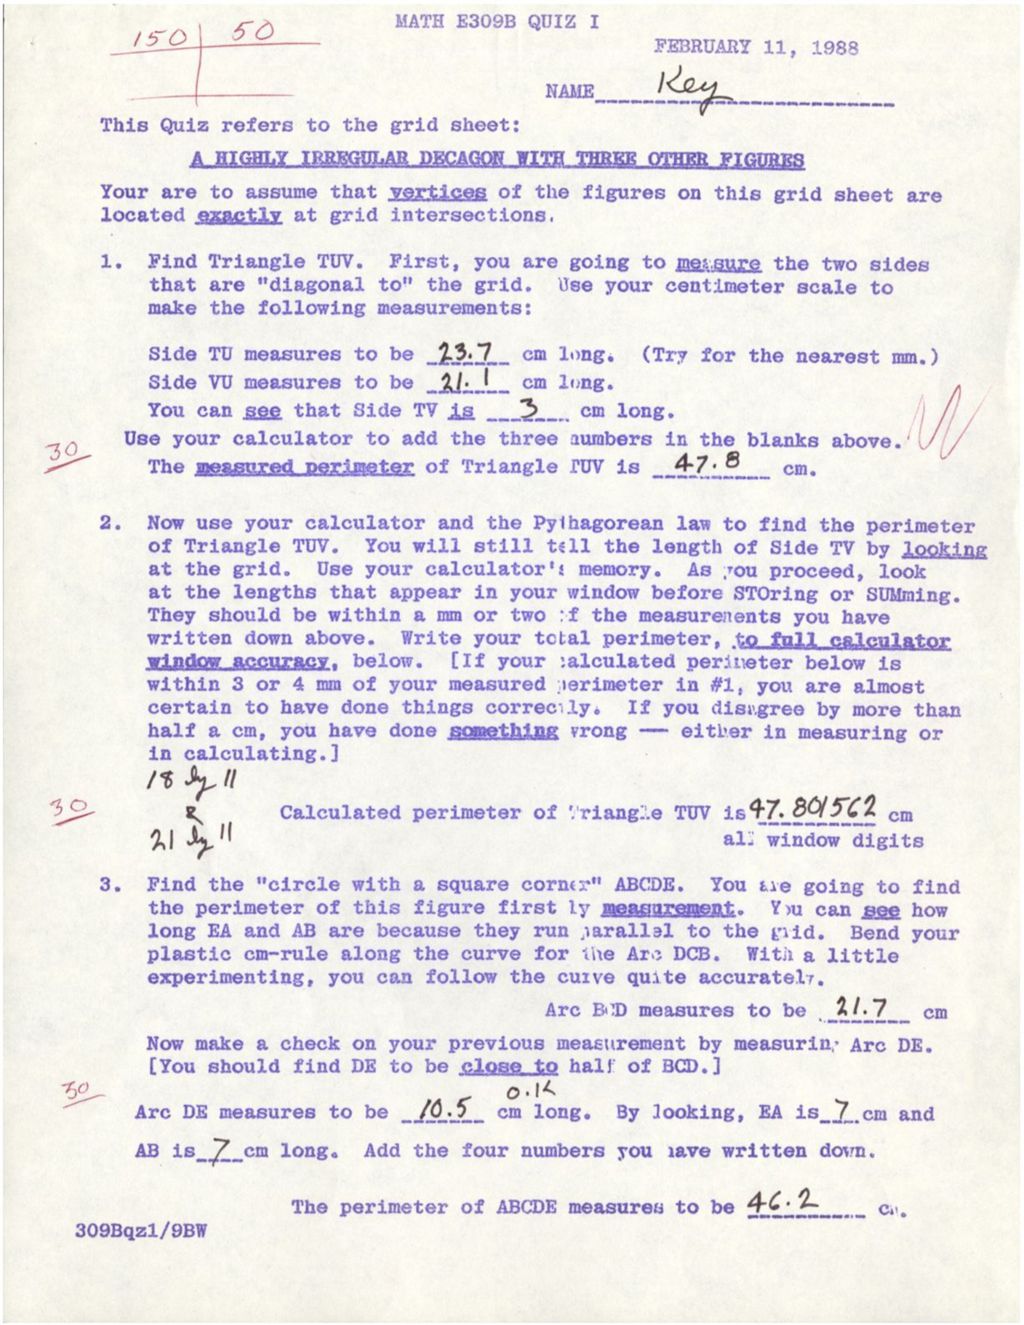 Miniature of Math E309B Quiz I (1988) AK Handwritten by Page;  A Highly Irregular Decagon with Three Other Figures